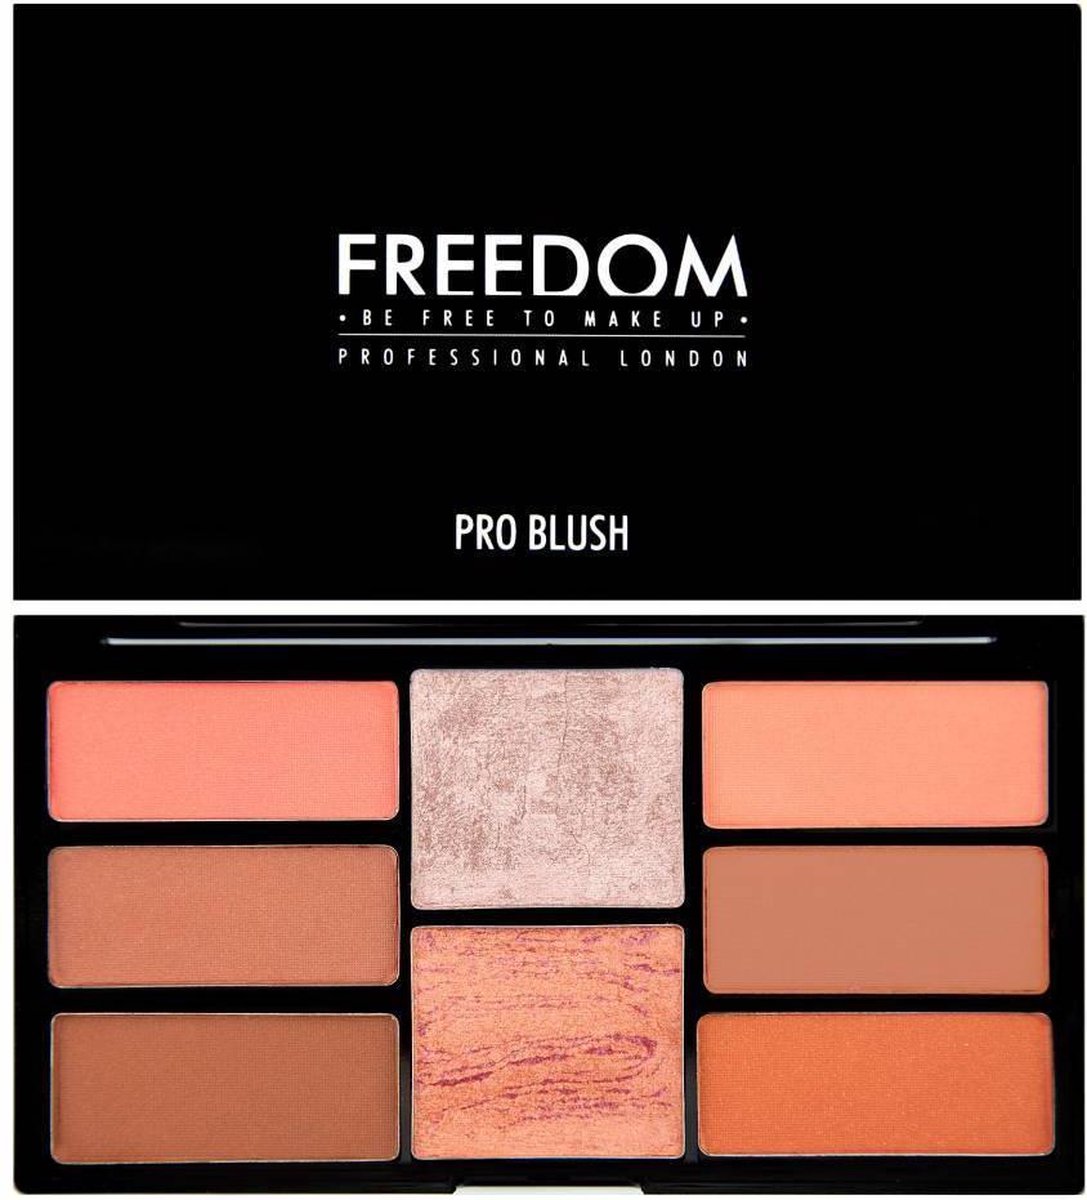 Freedom Makeup Pro Blush Palette - Peach and Baked